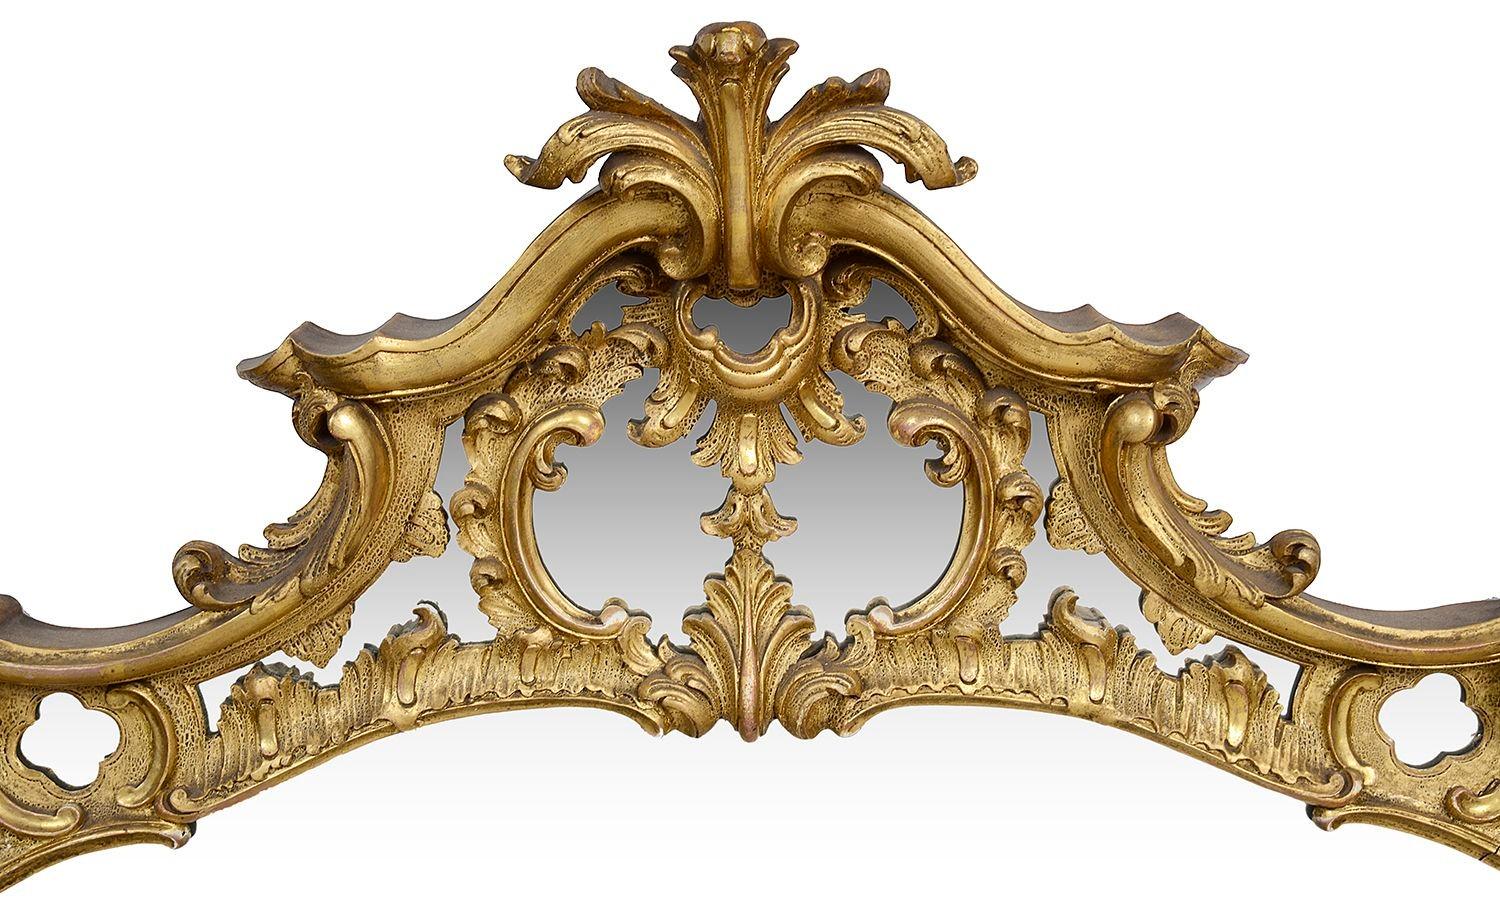 An ornate 19th Century Chippendale style carved giltwood and Gesso wall mirror, having wondeerful scrolling foliate, floral 'C' scroll decoration.

Batch 75 61031 UDNKZ